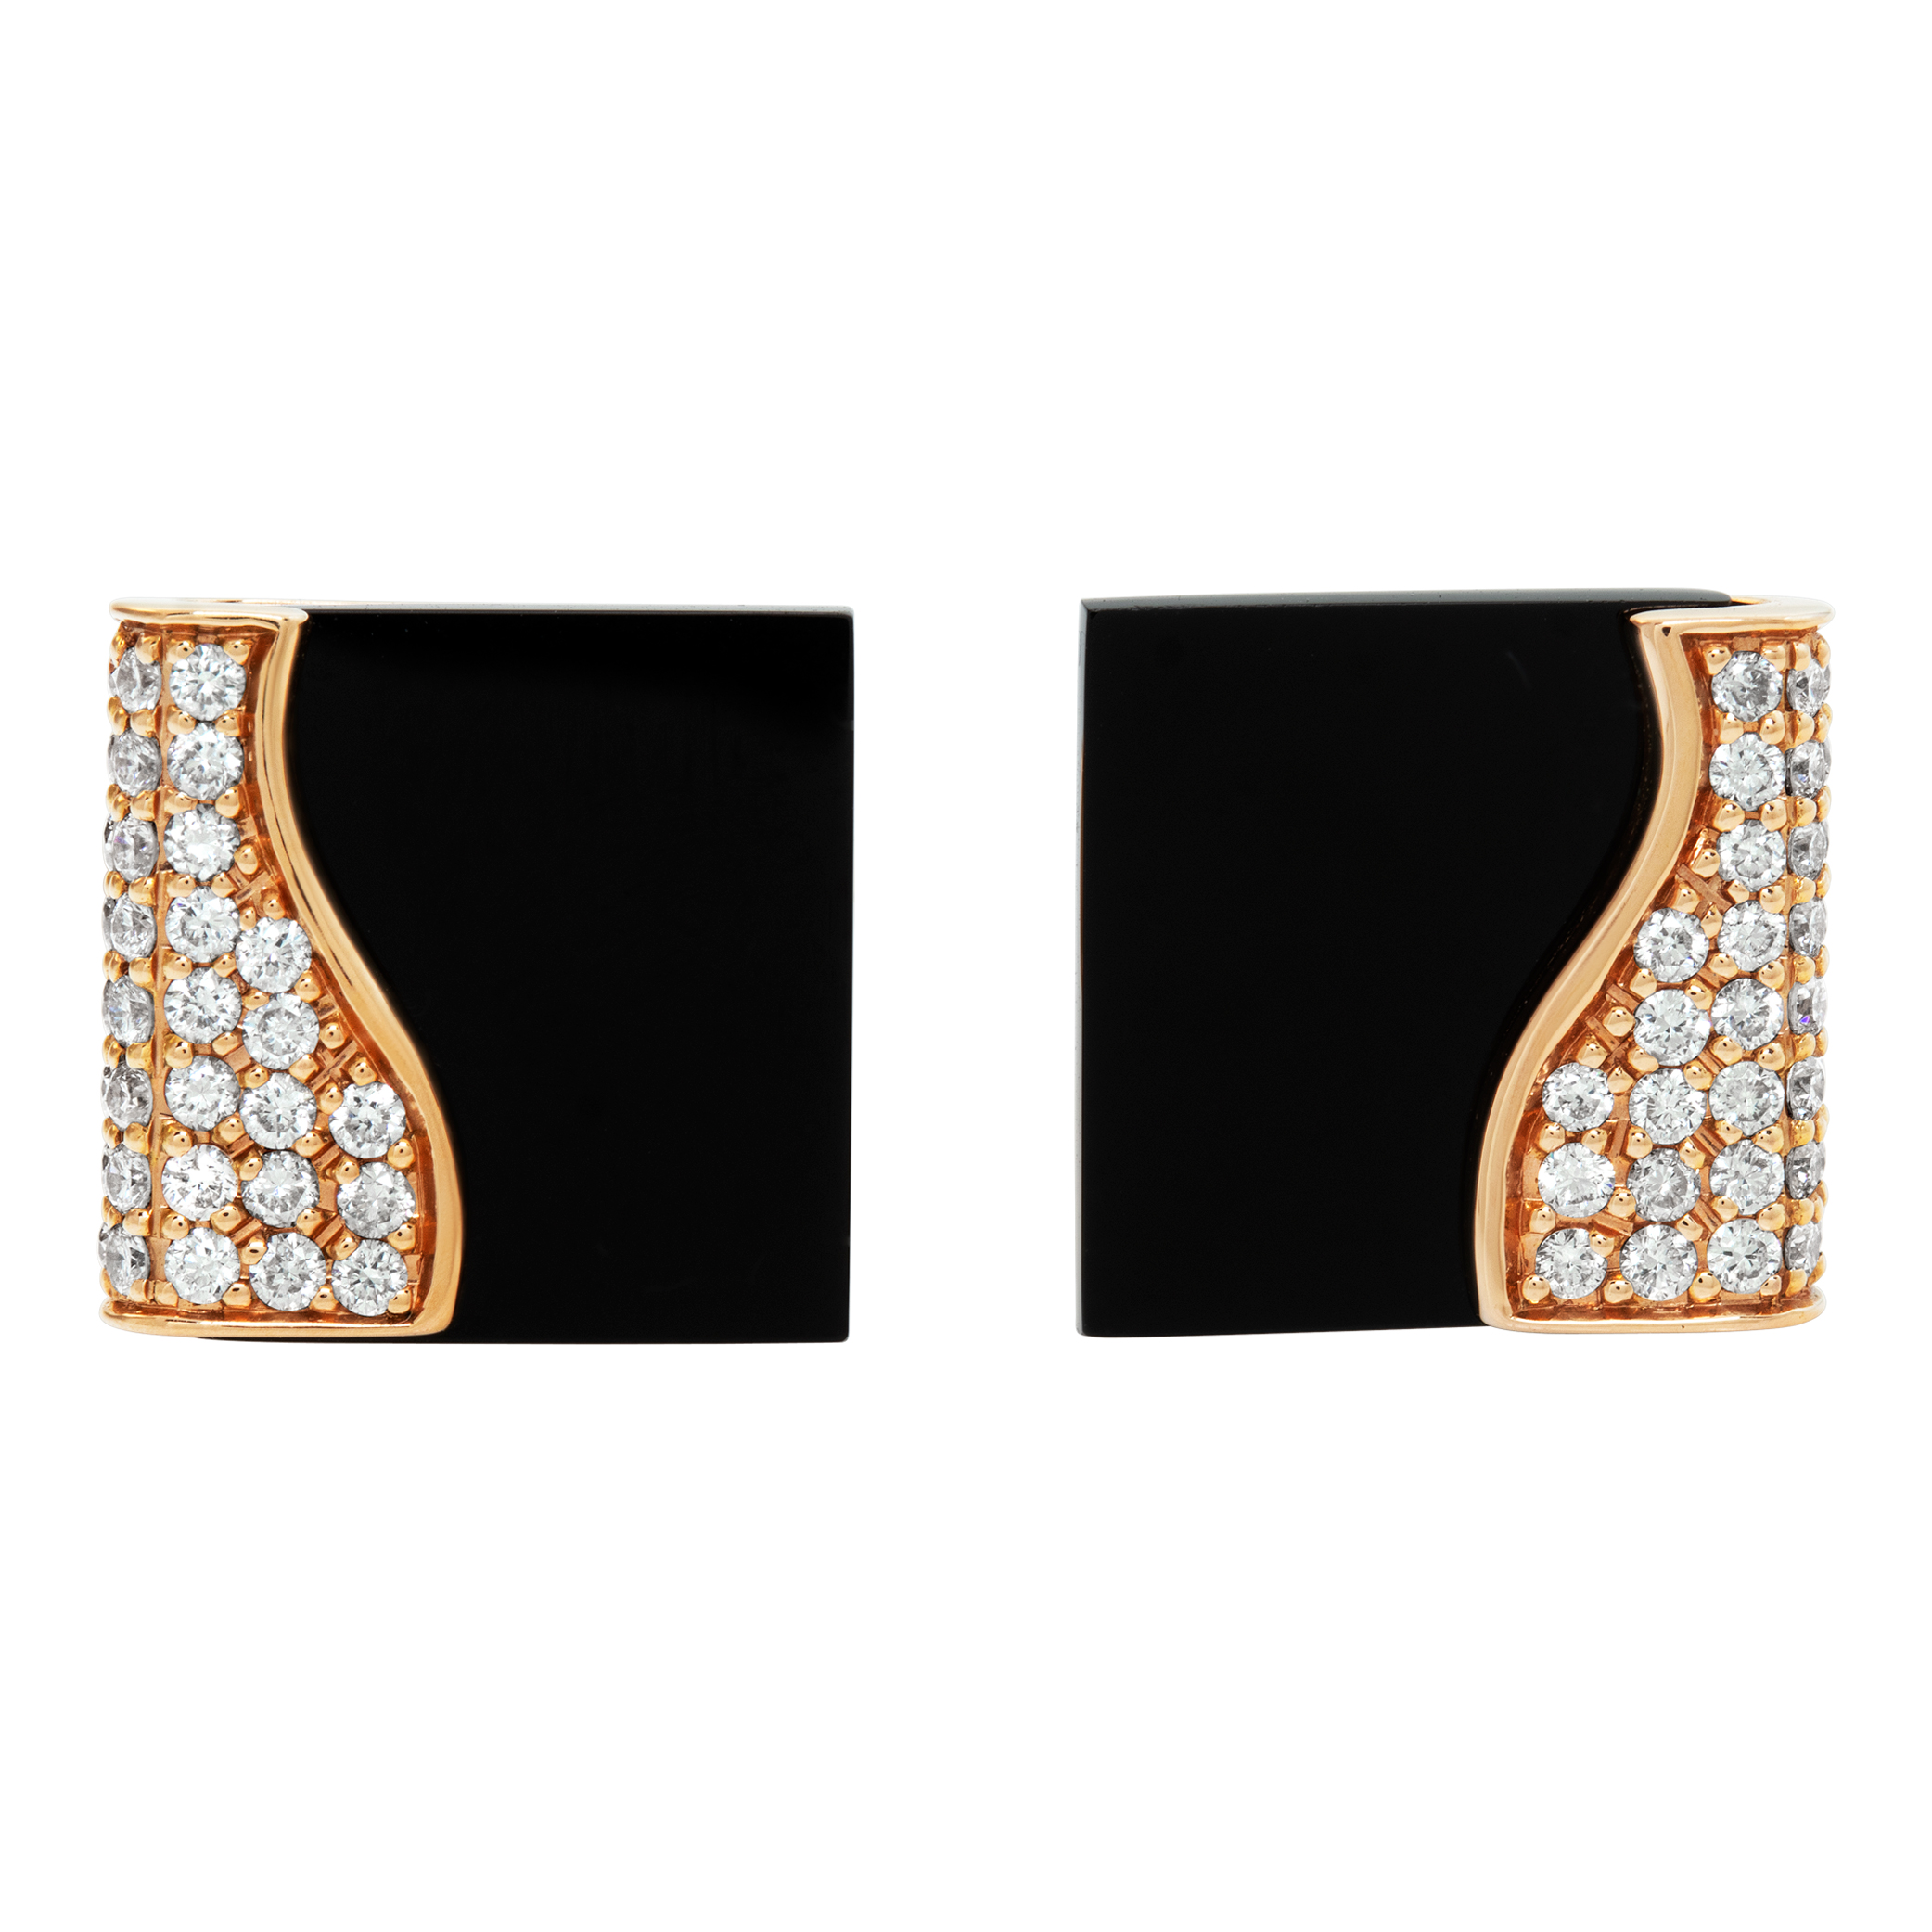 Onyx square cufflinks in 18k rose gold with 0.70 ct in pave diamonds